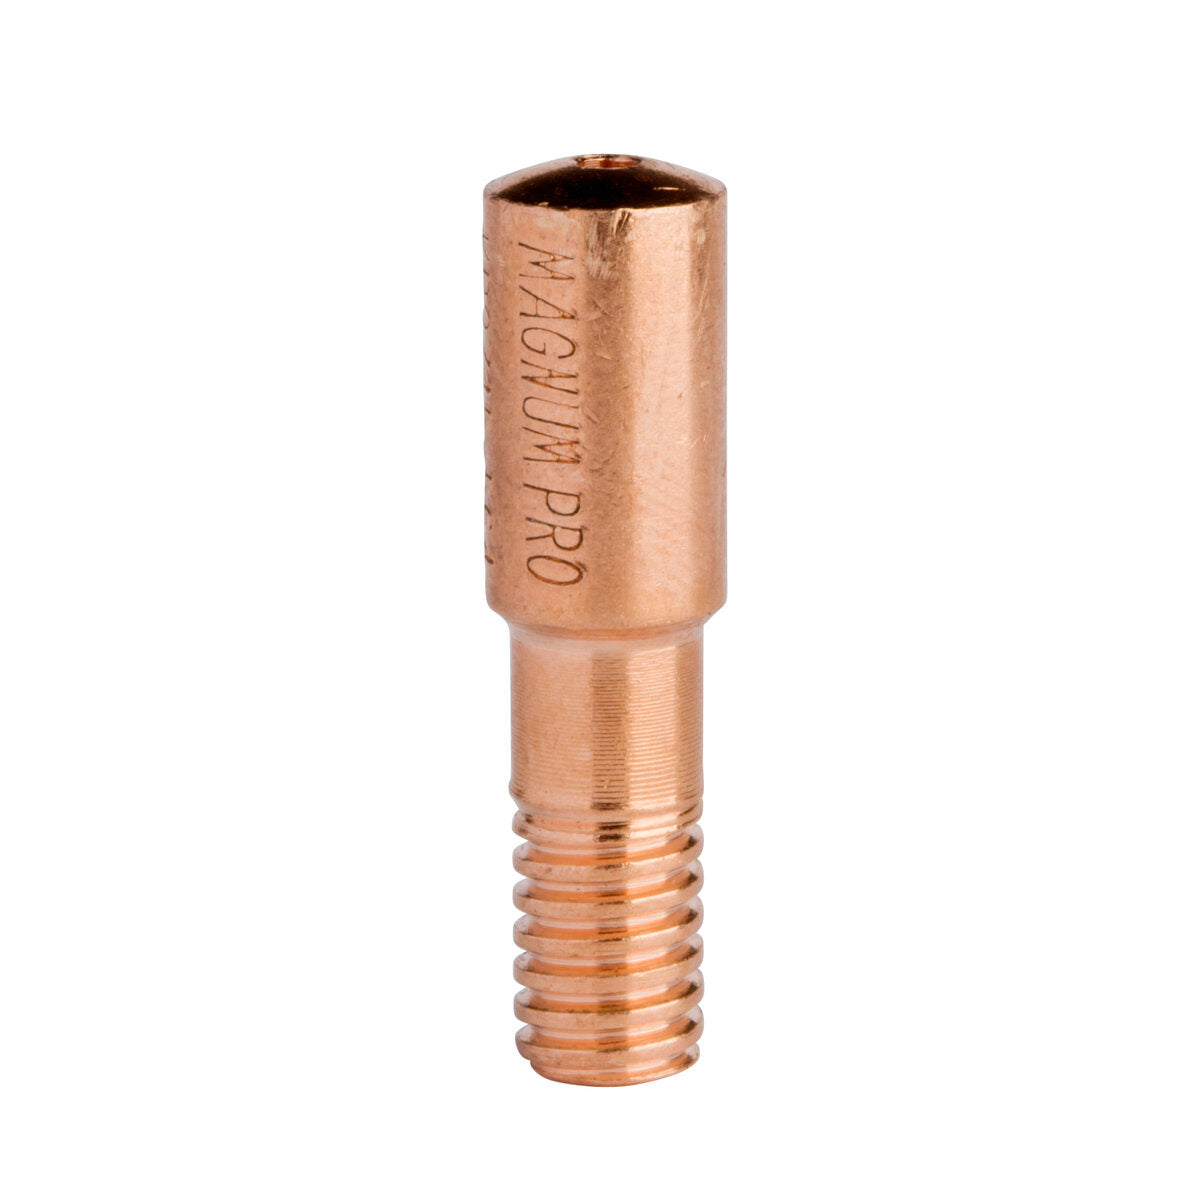 Lincoln Electric - Copper Plus® Contact Tip - 550A, Standard, 0.035 in (10/pack) - KP2745-035